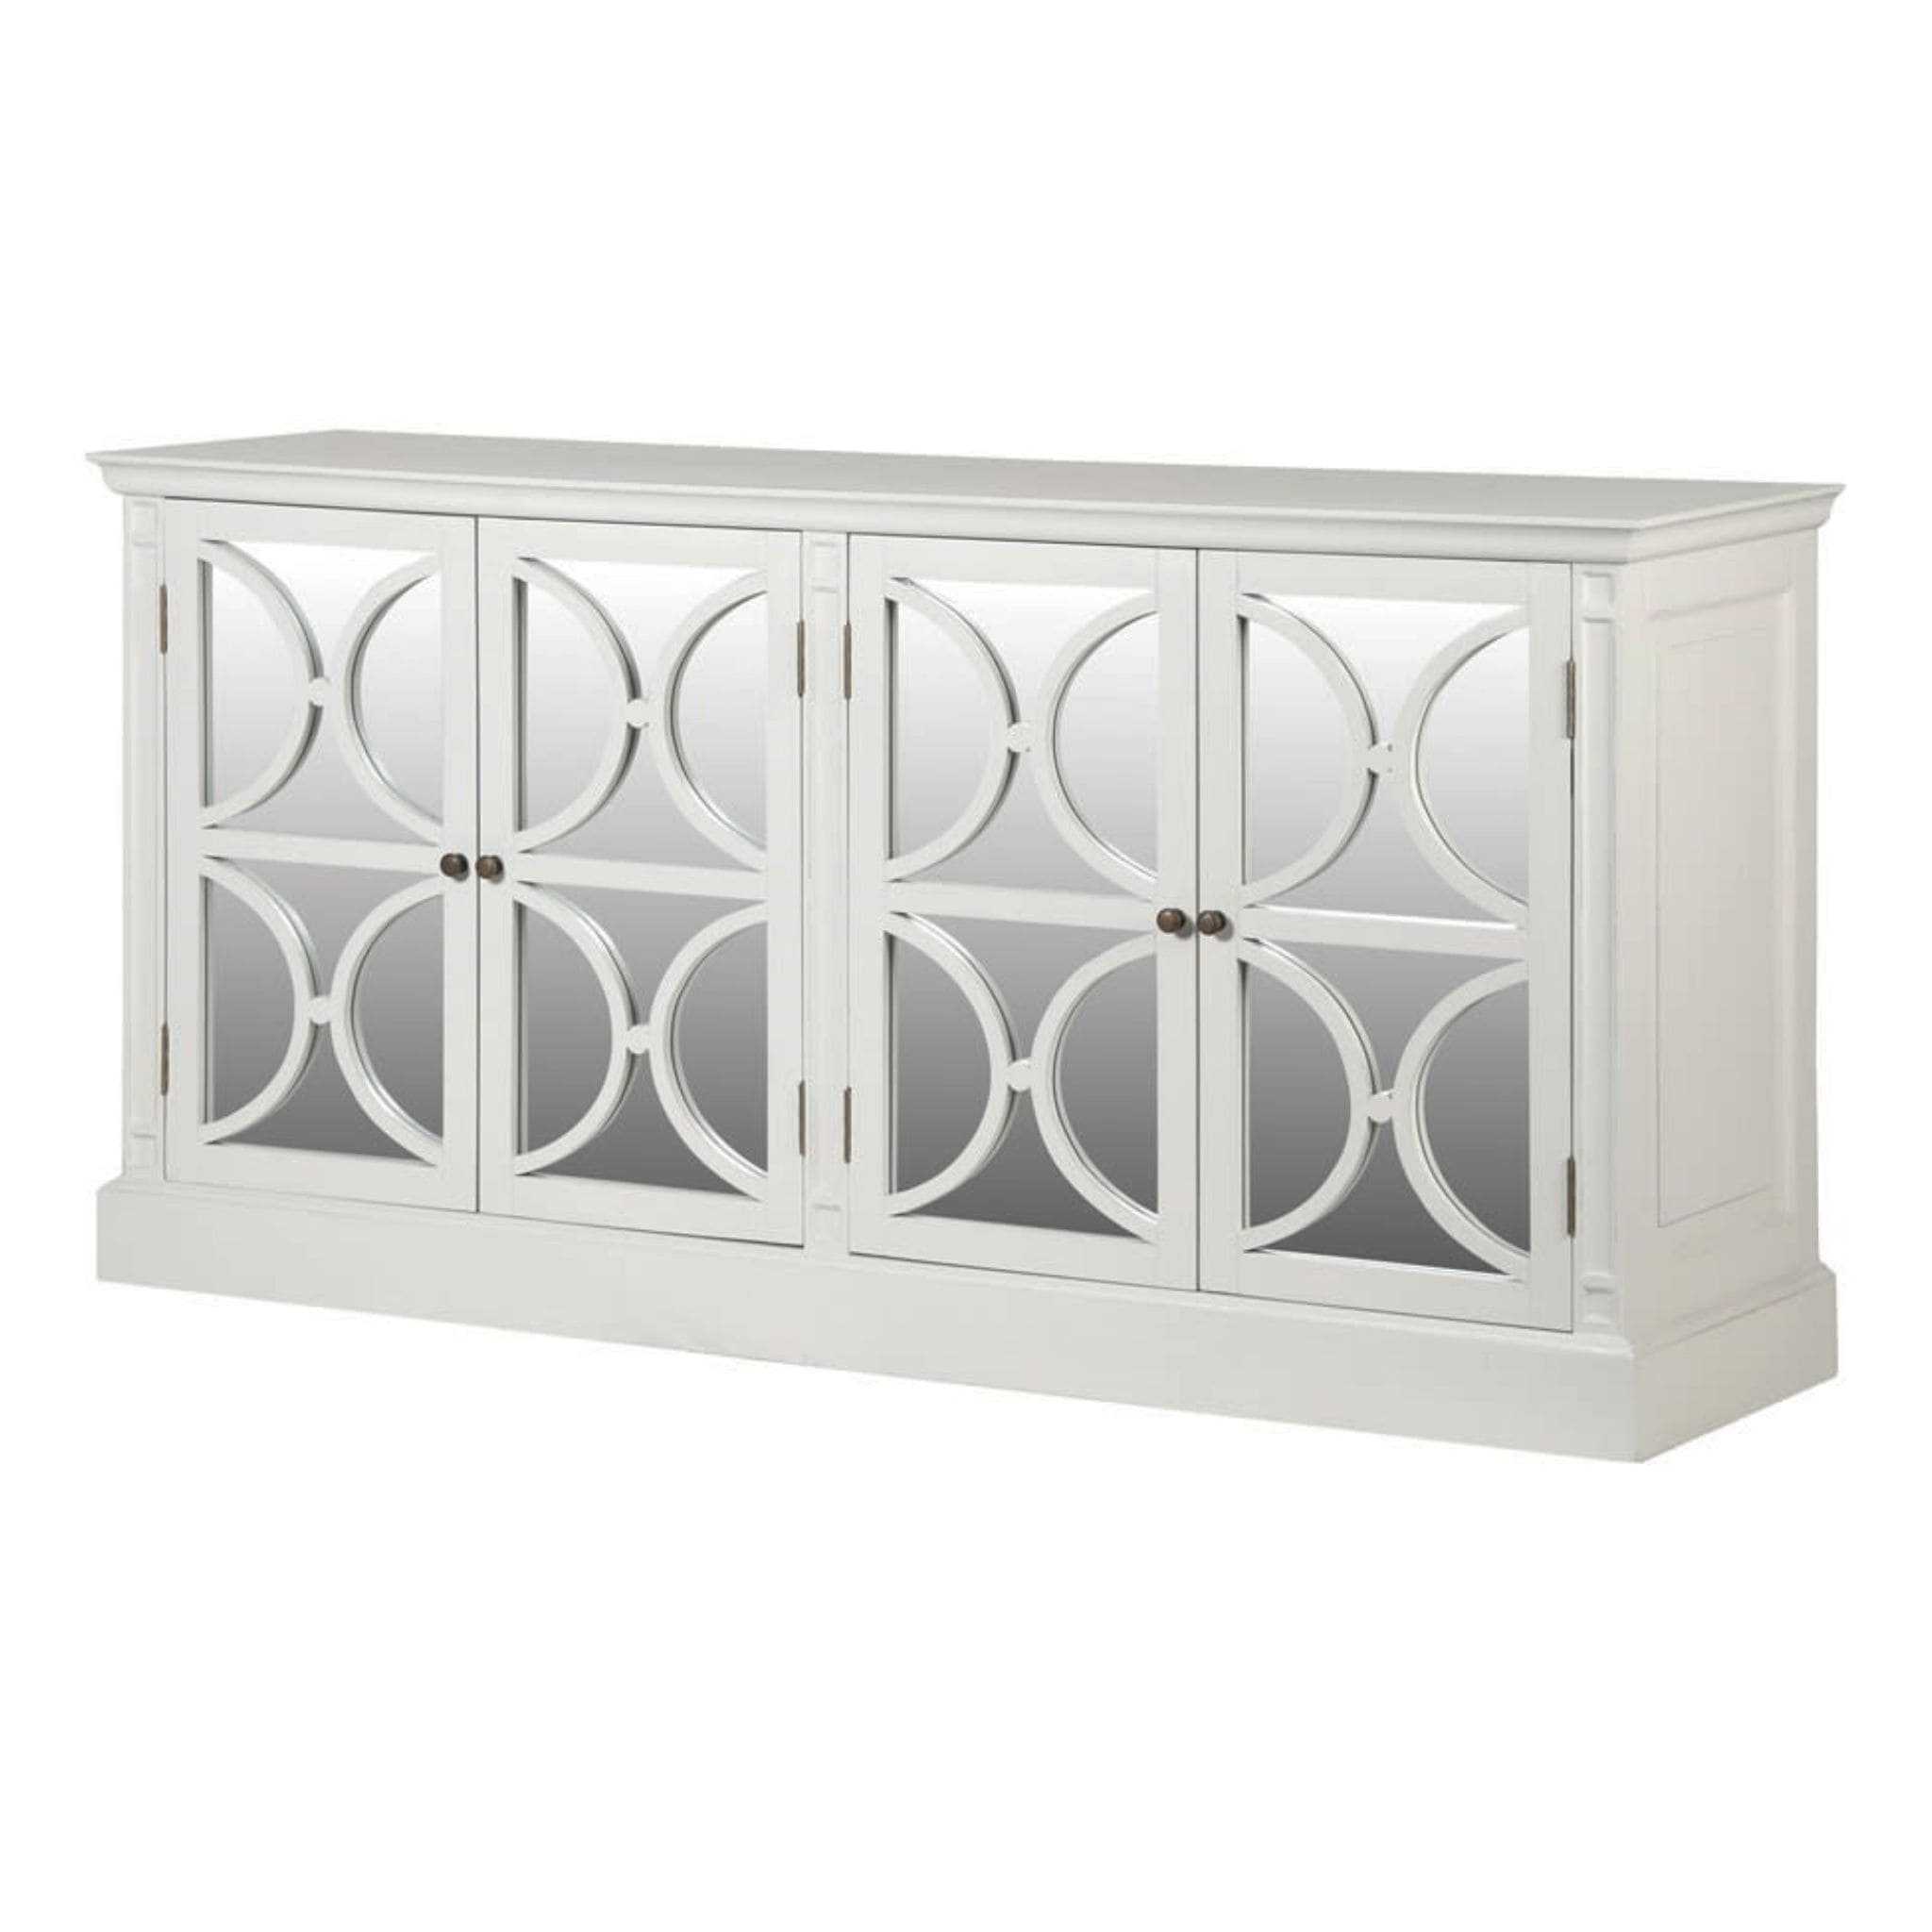 Escapology St Ermins 4-Door Mirrored Sideboard - White - escapologyhome.co.uk